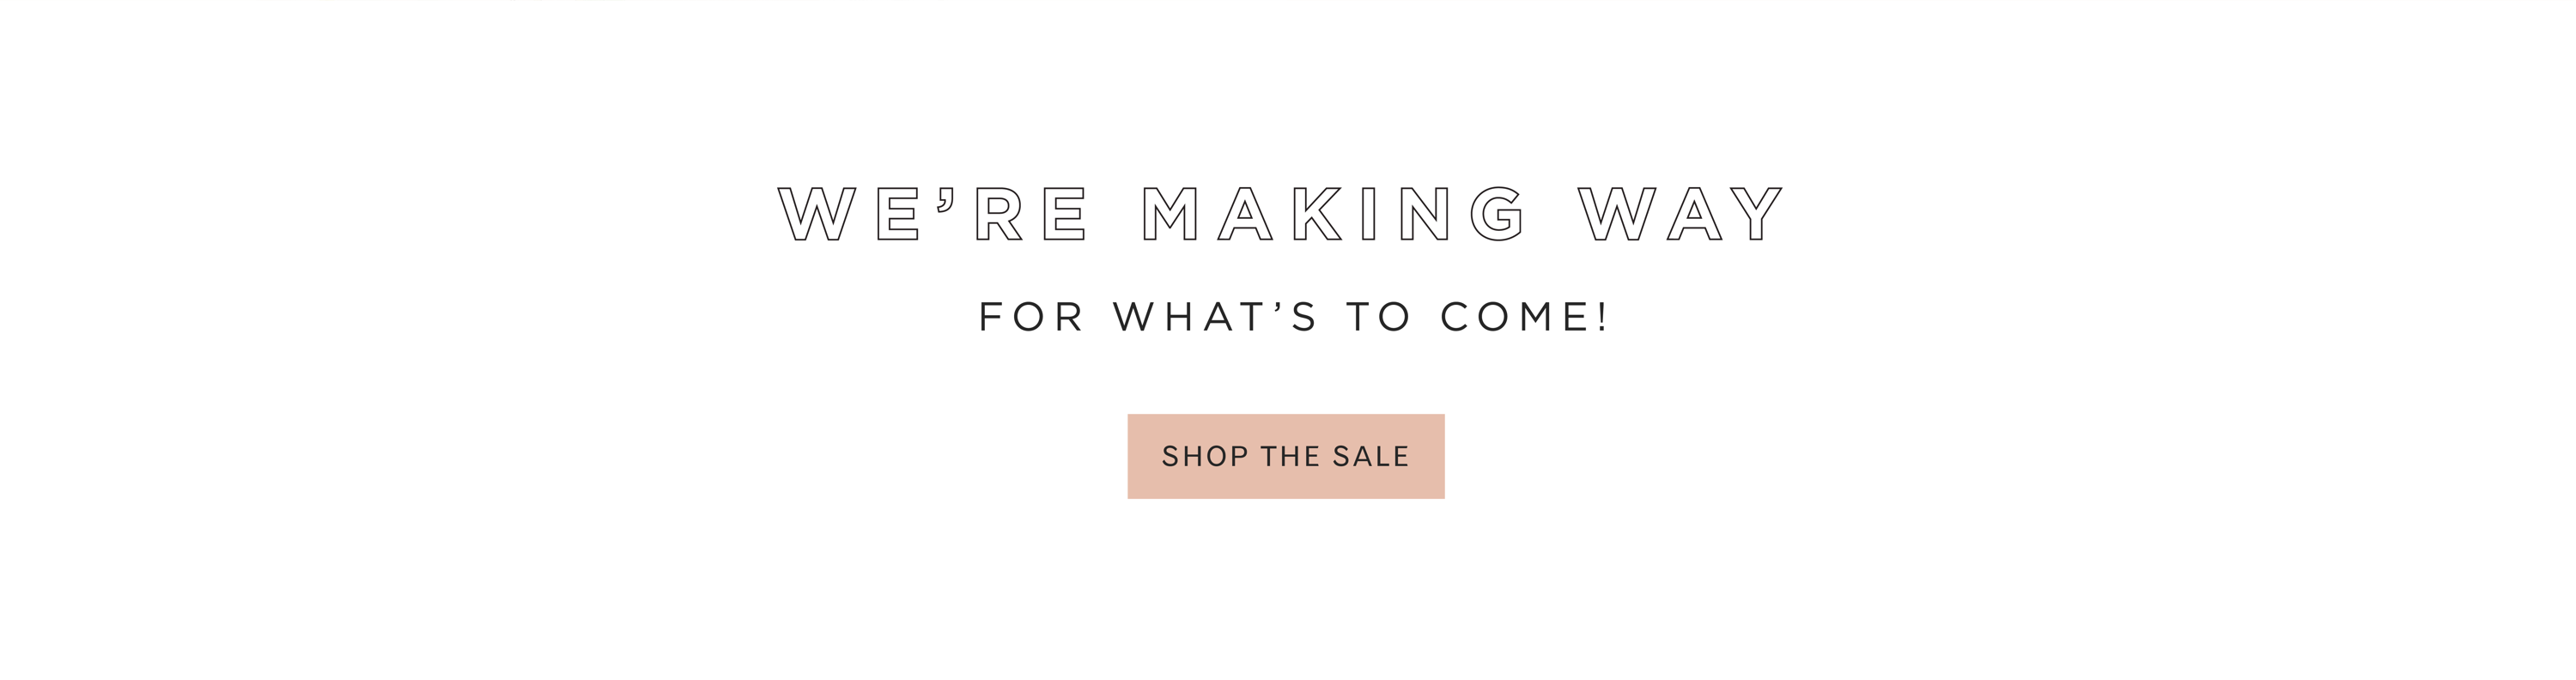 WE'RE MAKING WAY FOR WHATS TO COME! SHOP THE SALE.